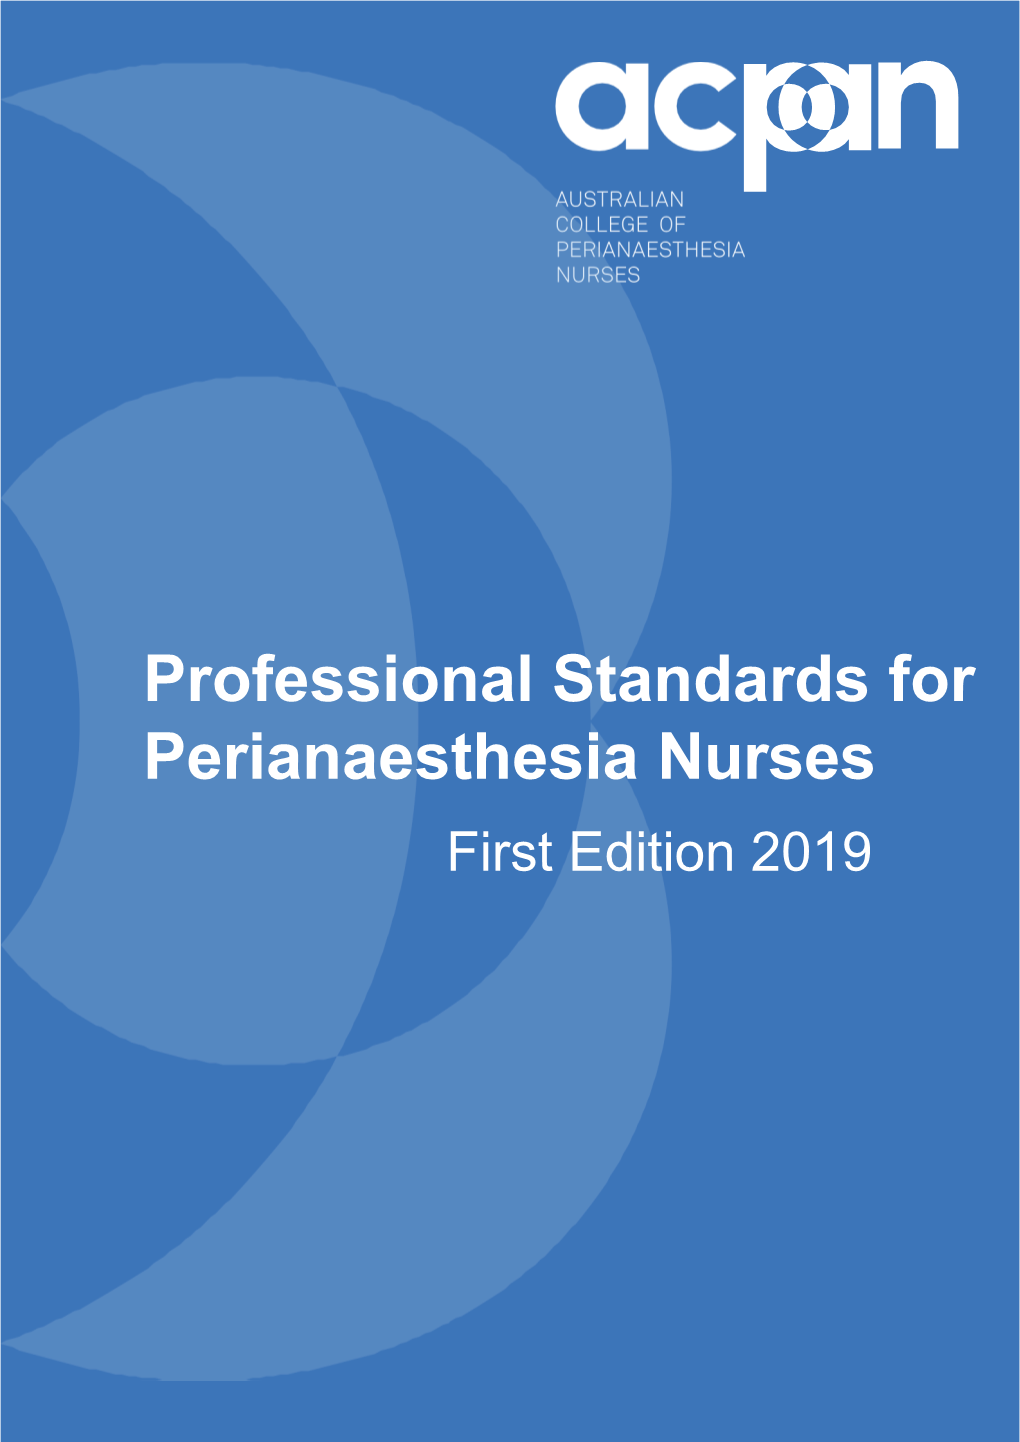 Professional Standards for Perianaesthesia Nurses First Edition 2019